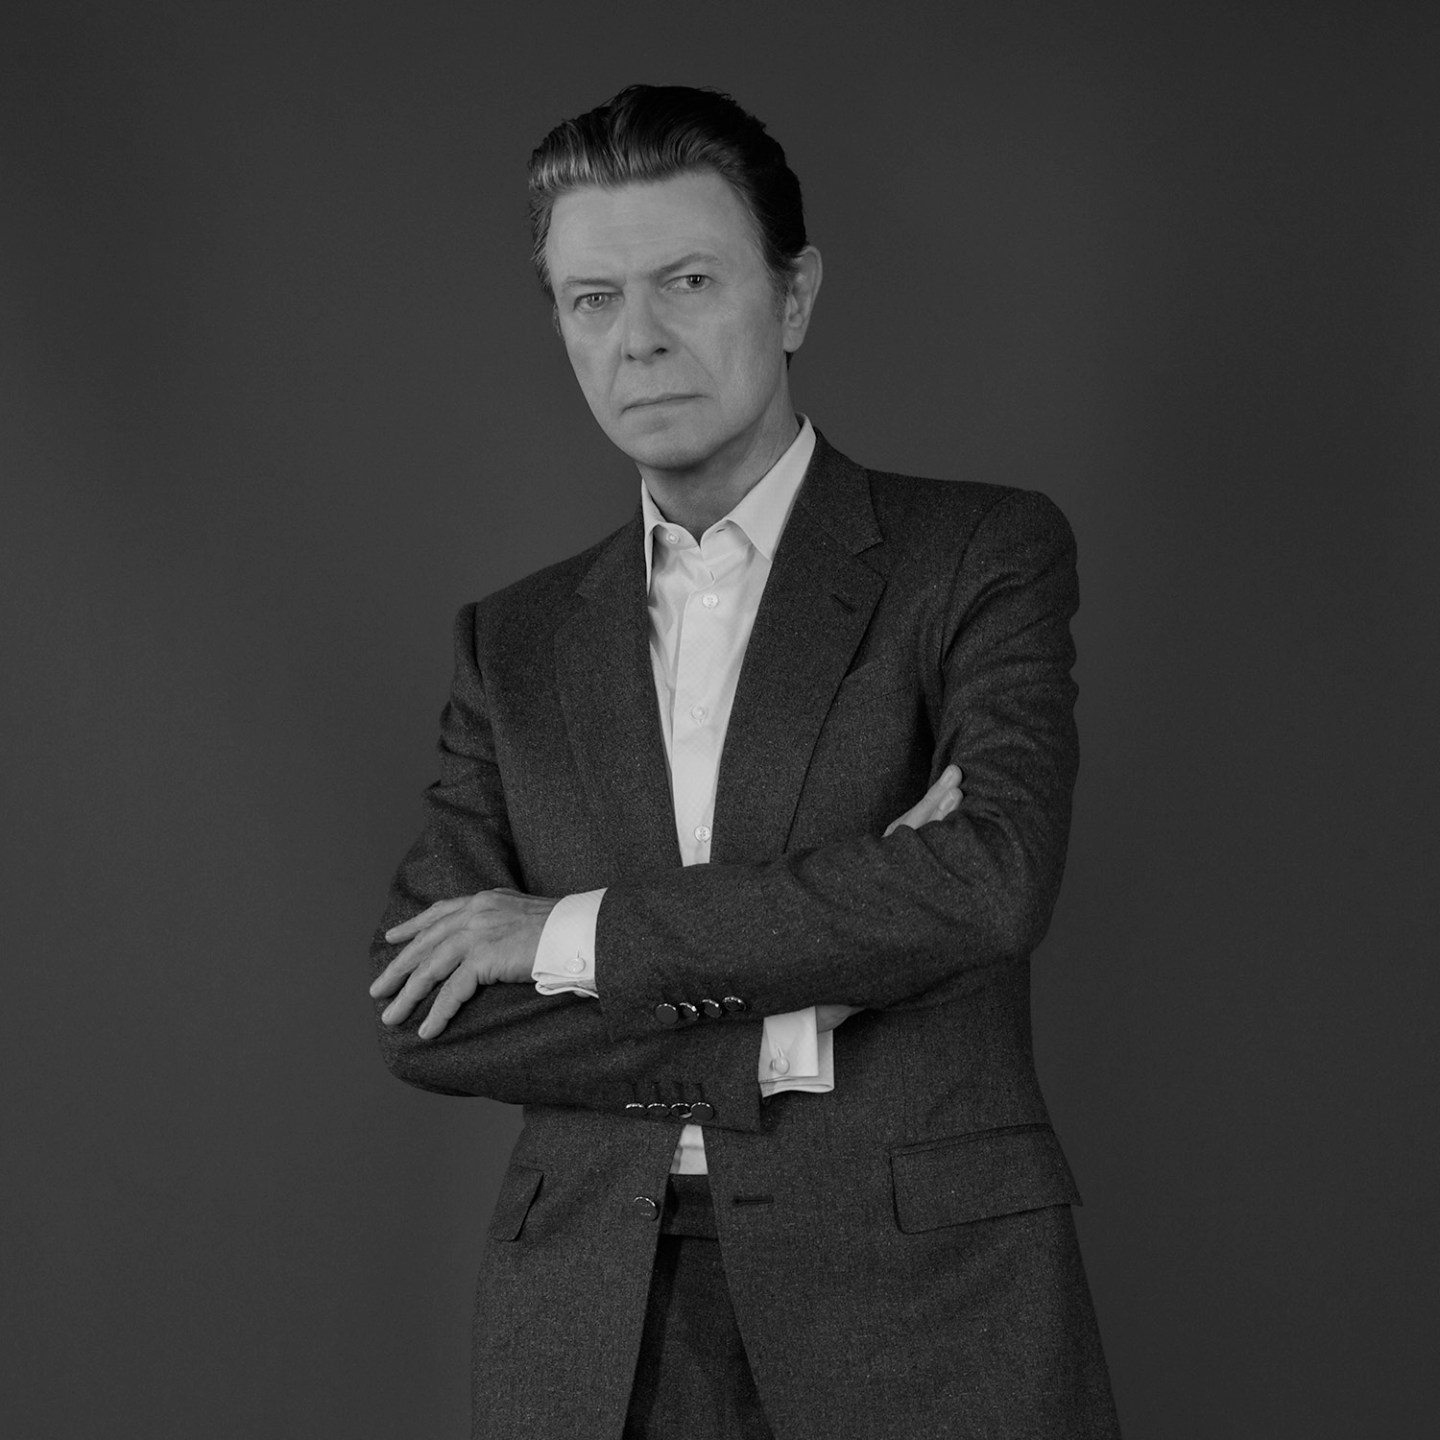 © The David Bowie Archive ® Photo by Jimmy King